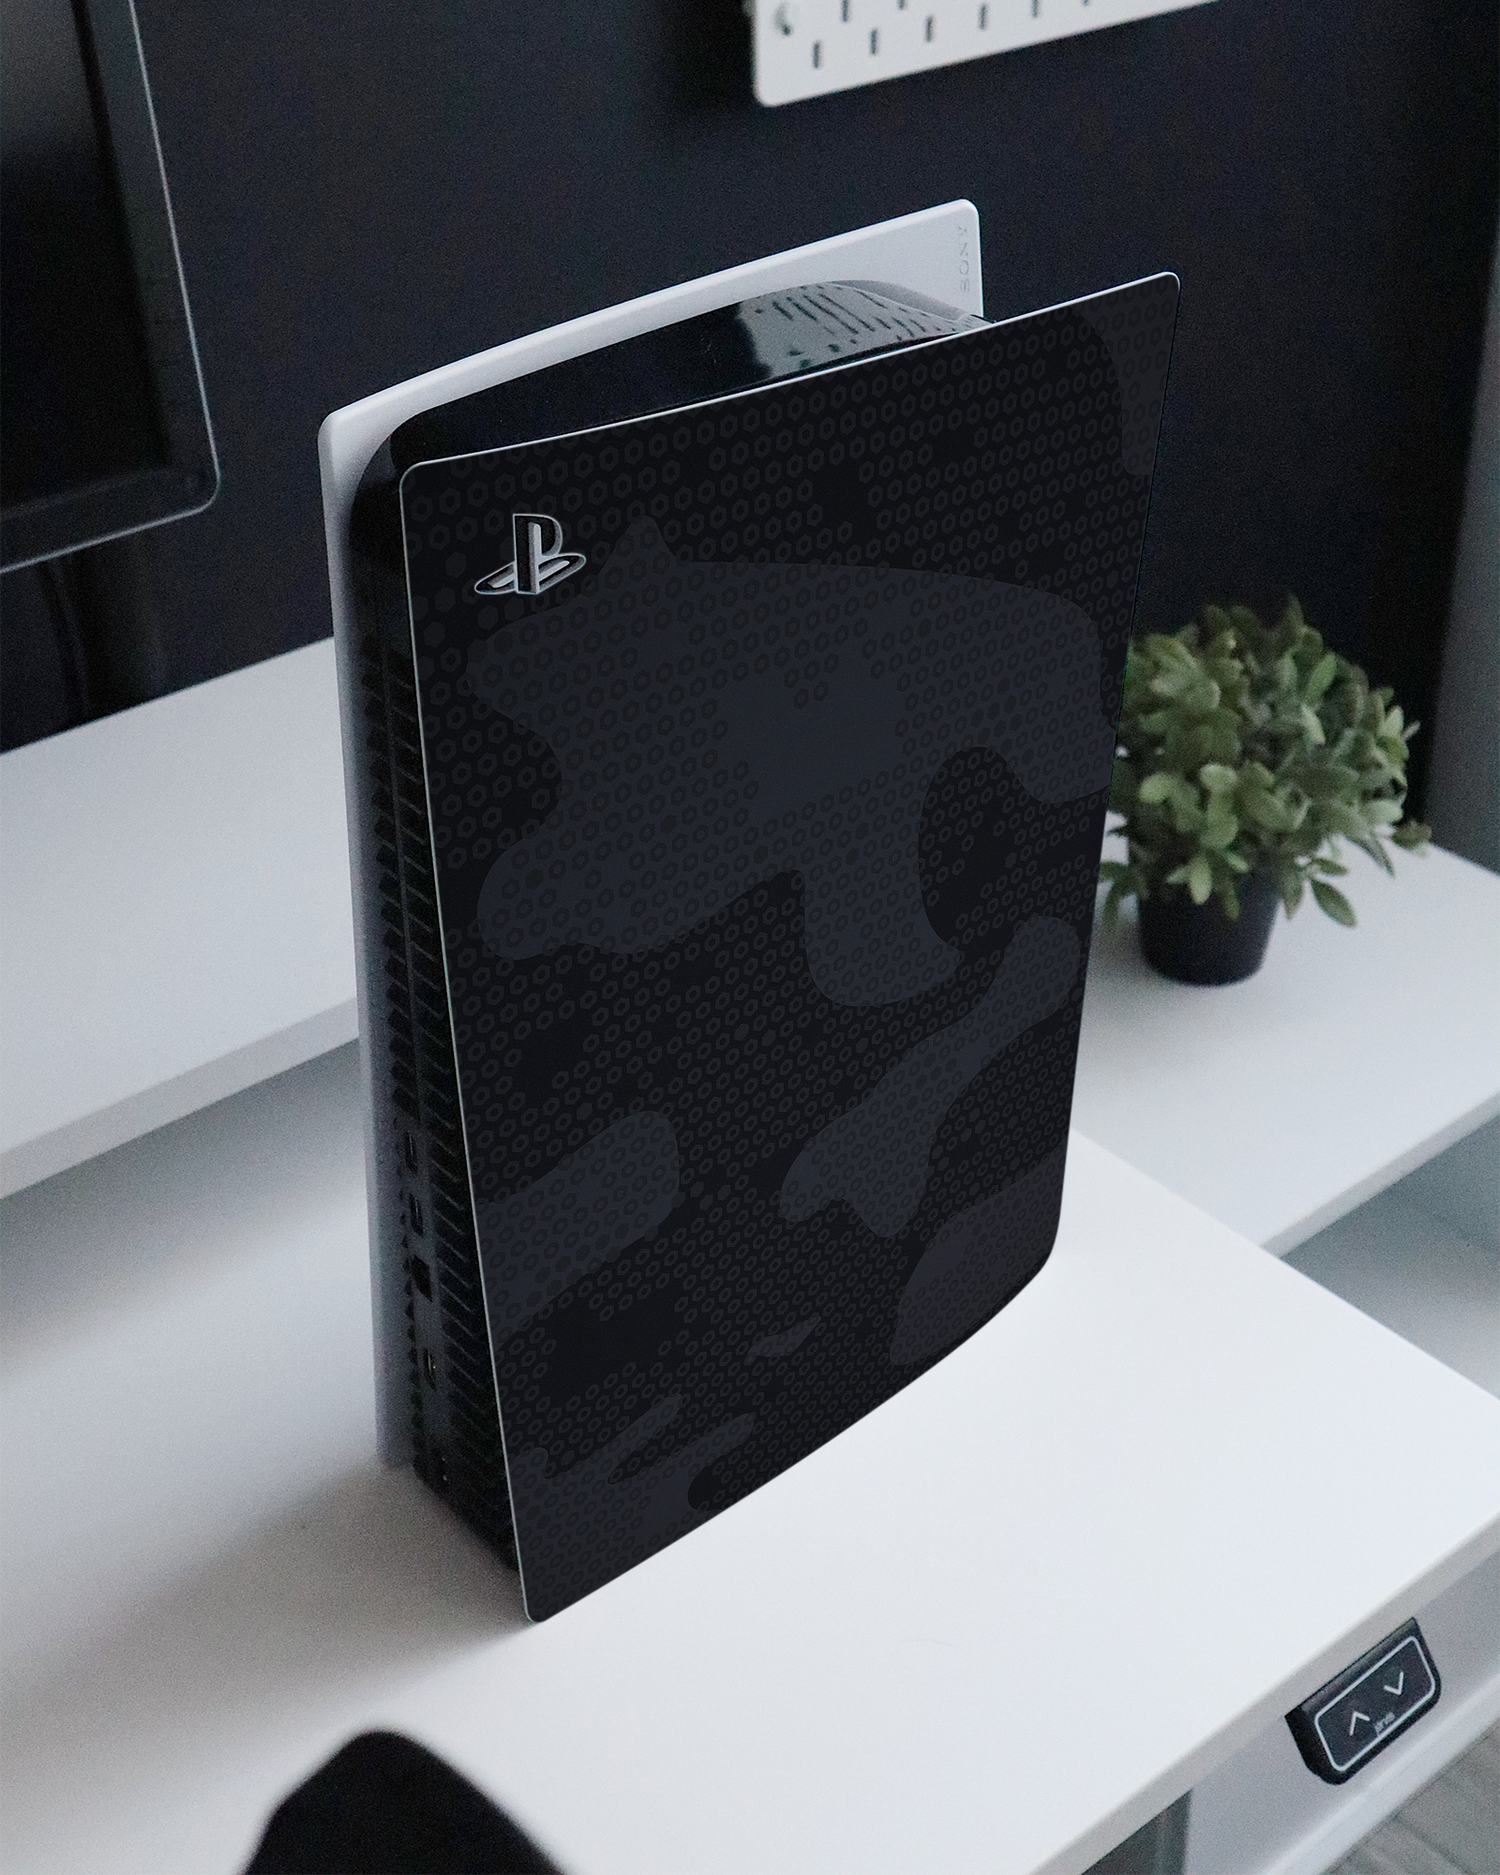 Spec Ops Dark Console Skin for Sony PlayStation 5 standing on a sideboard 